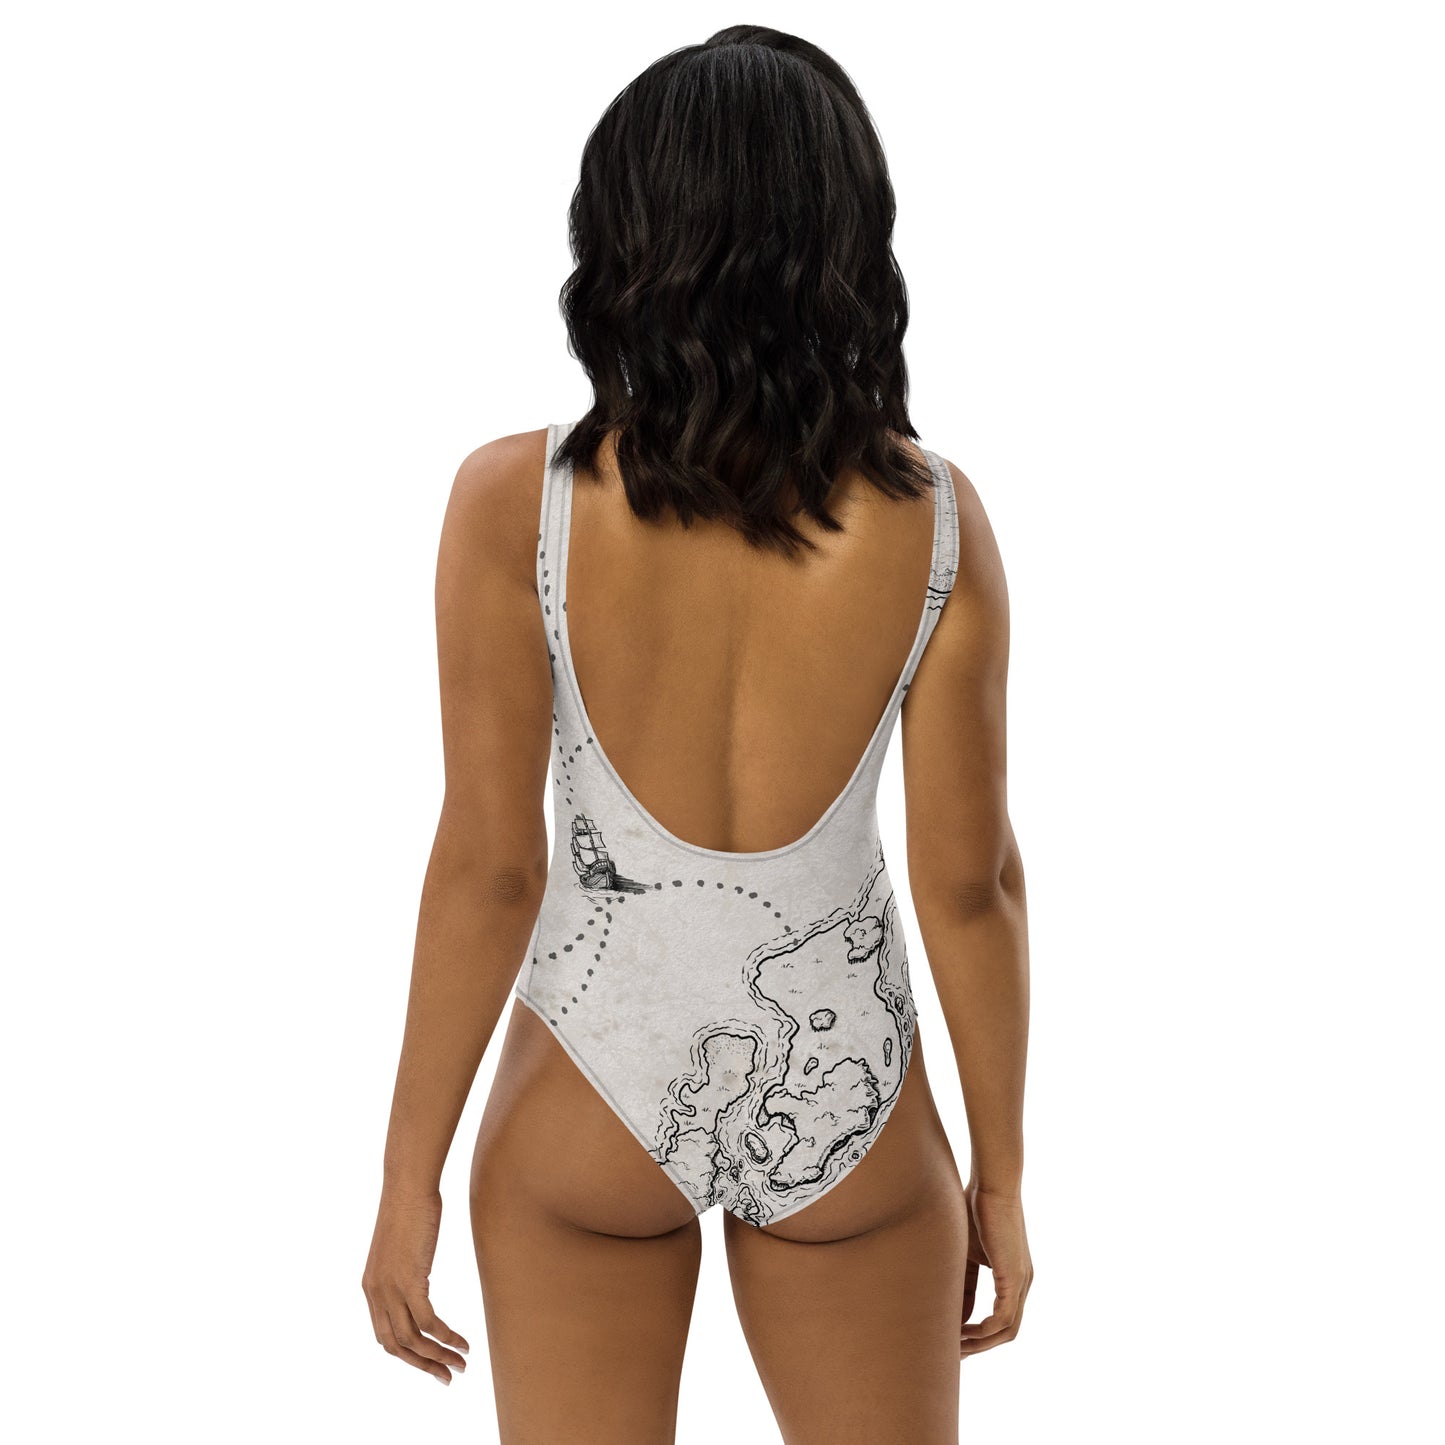 A model wears the Sailing into the Unknown one piece swimsuit by Deven Rue, back view.